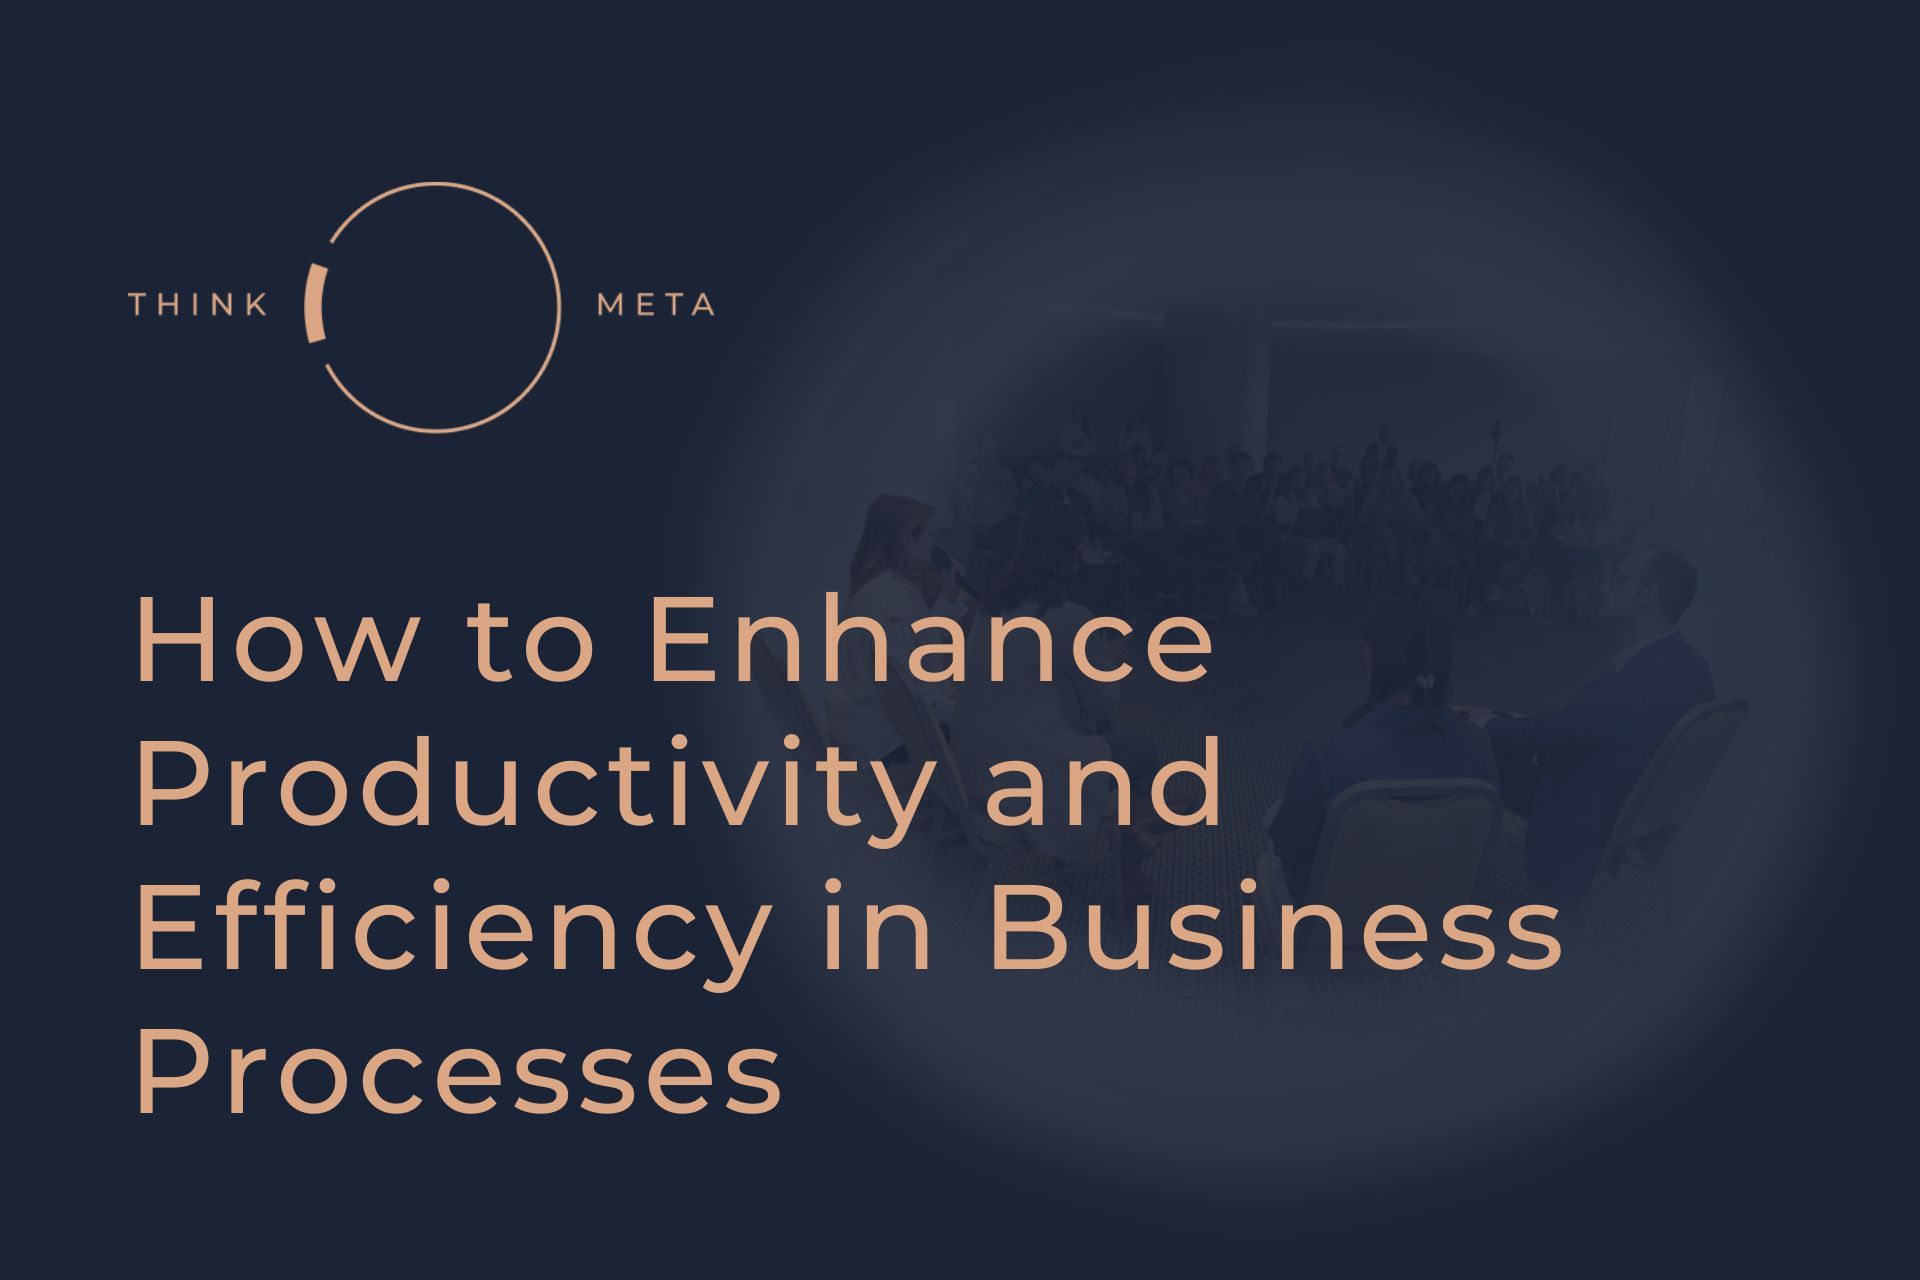 How to Enhance Productivity and Efficiency in Business Processes